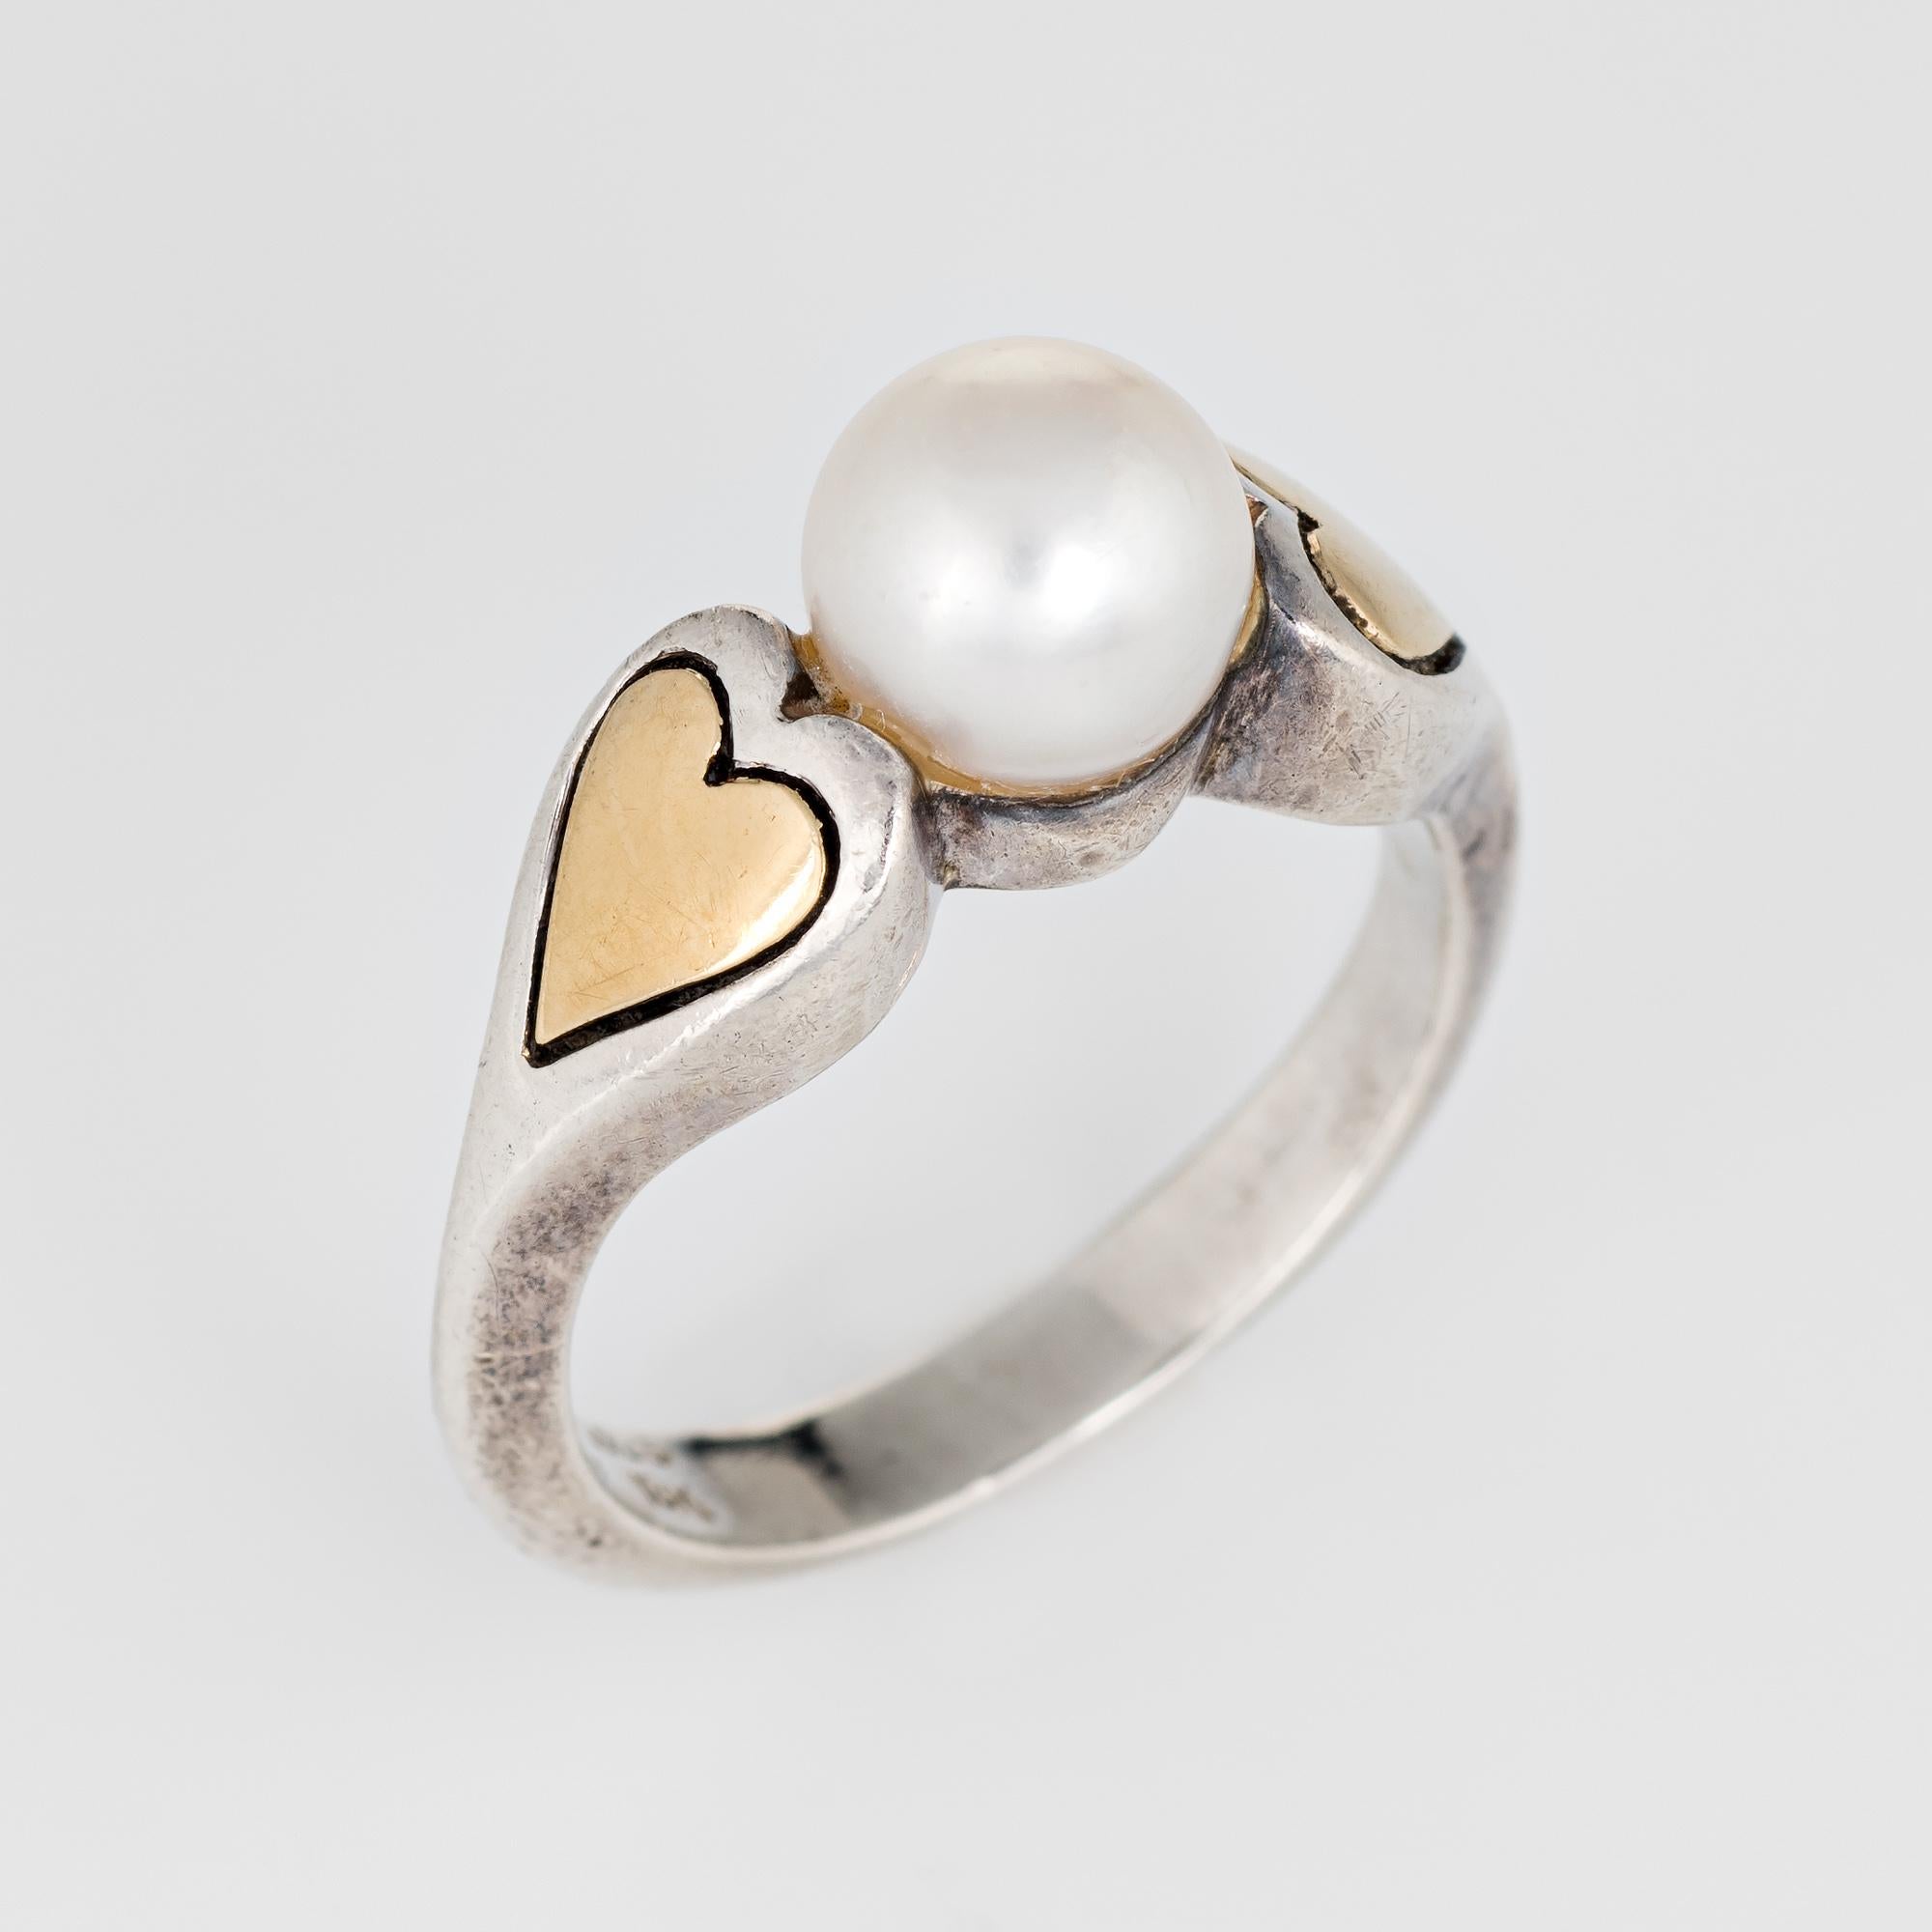 Vintage Cartier cultured pearl ring crafted in sterling silver & 18k yellow gold (circa 1960s).  

The ring is set with a 6.8mm cultured pearl. The pearl is in excellent condition and free of cracks or chips. 

The ring is in very good condition. We